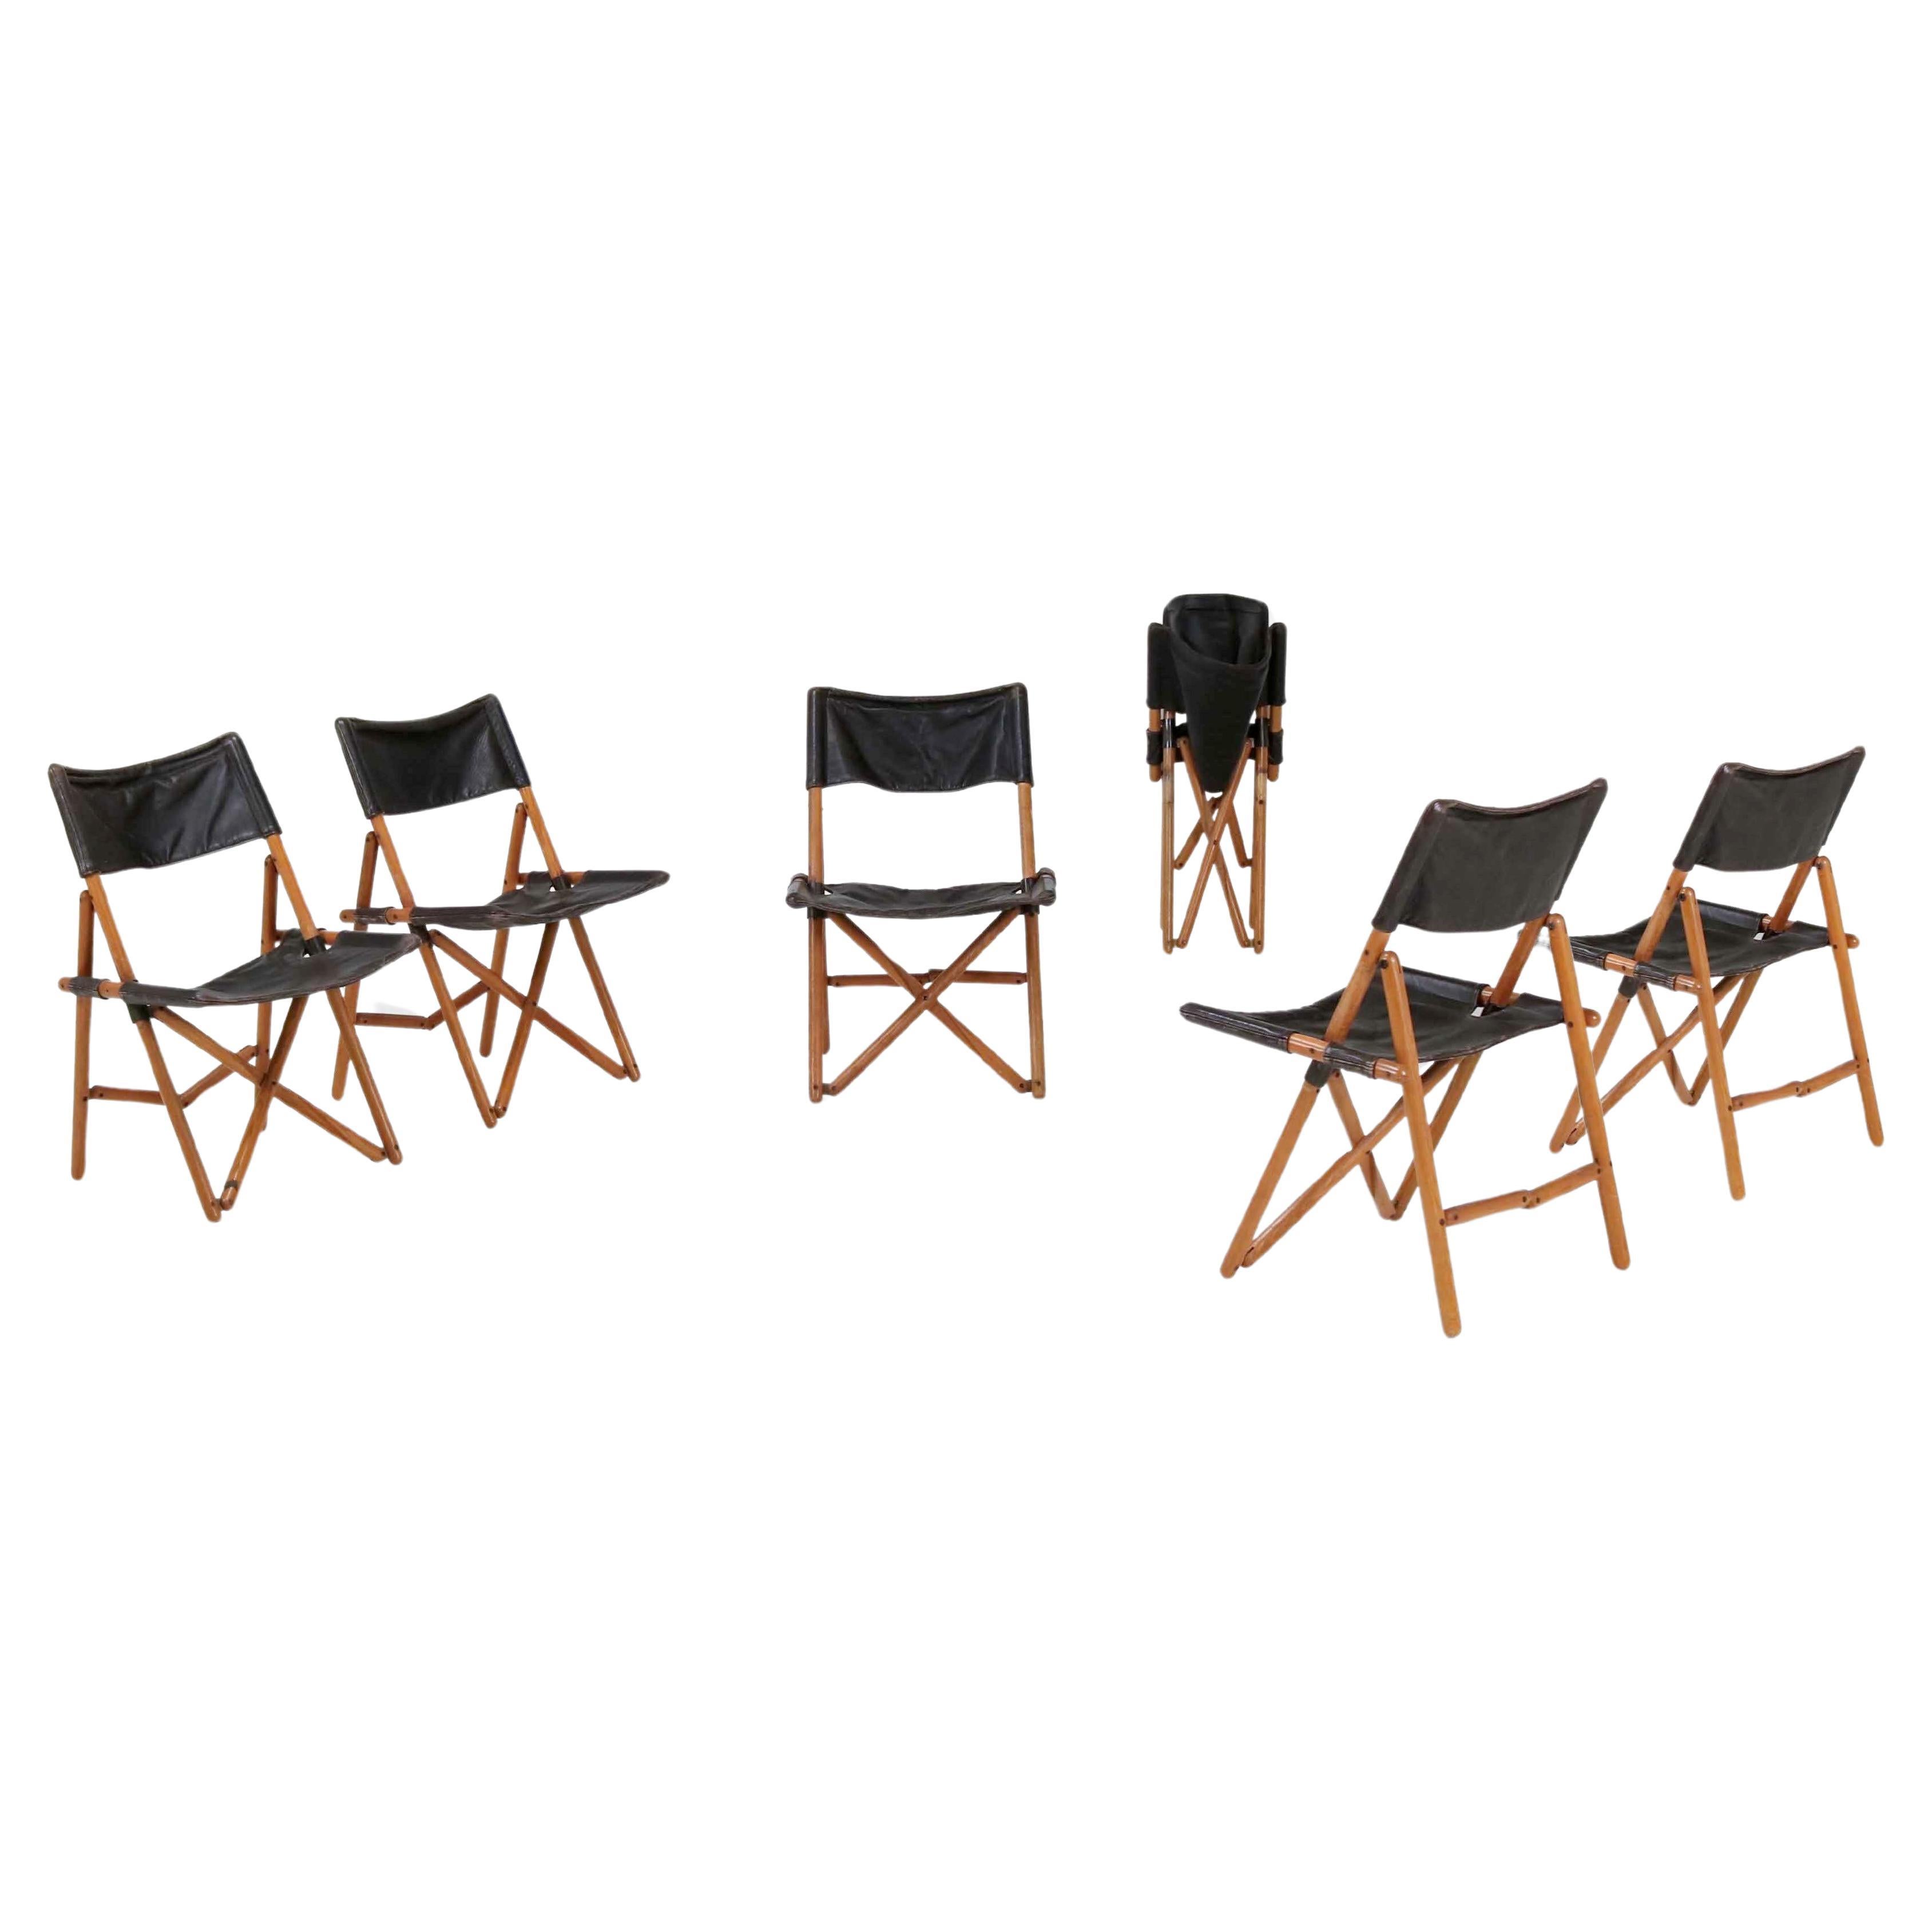 Six Folding Chairs in Leather Model Navy by Sergio Asti, Italian Design, 1969 